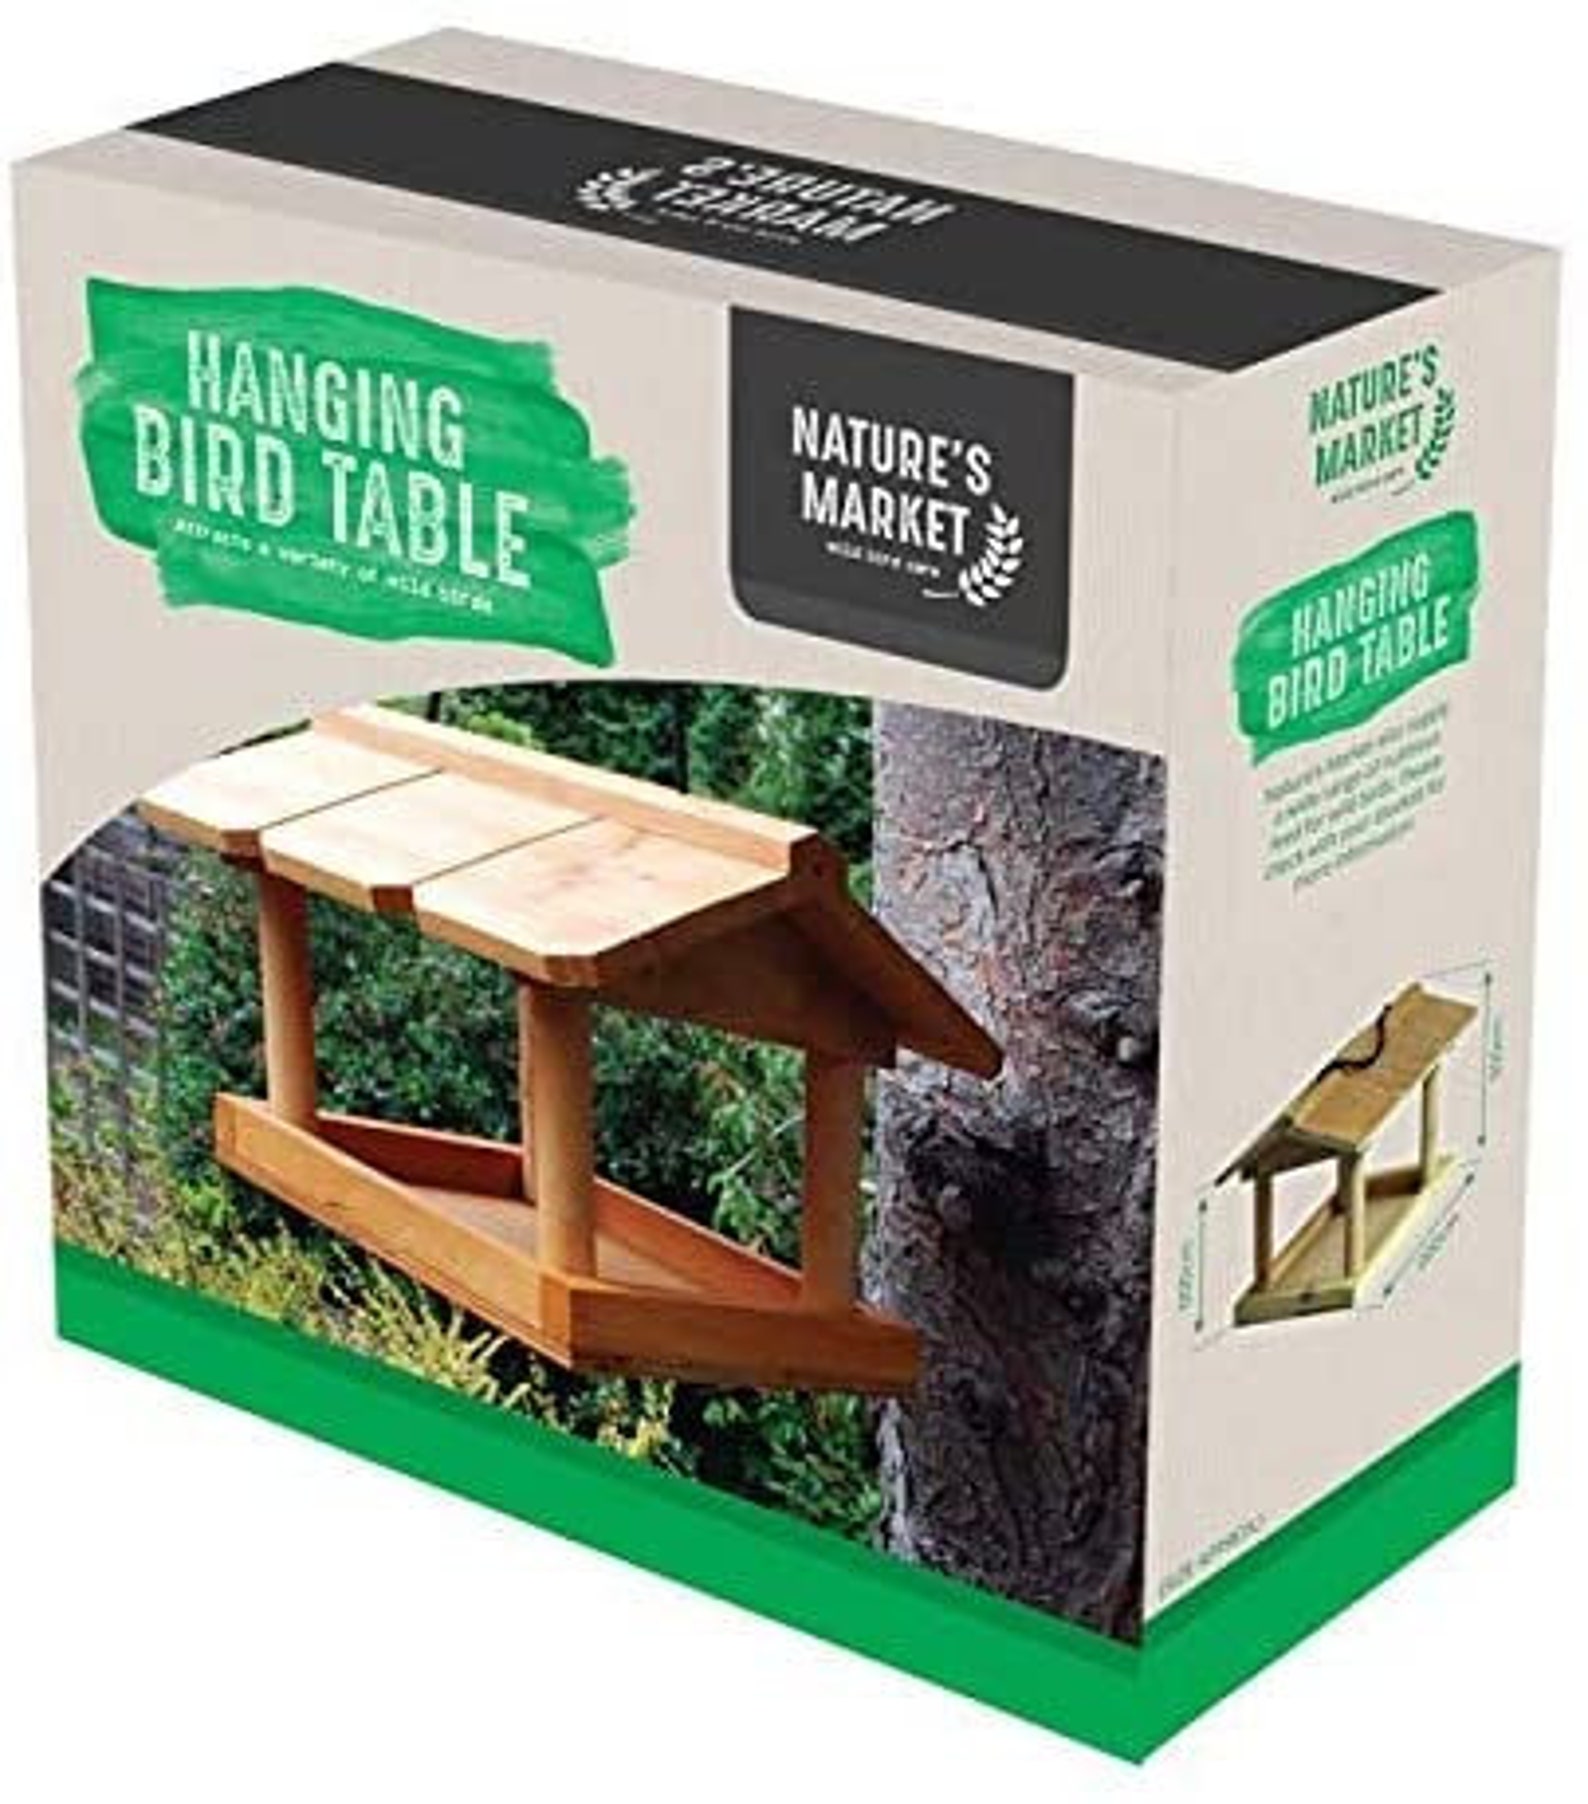 Best bird tables to feed our feathered friends in your garden